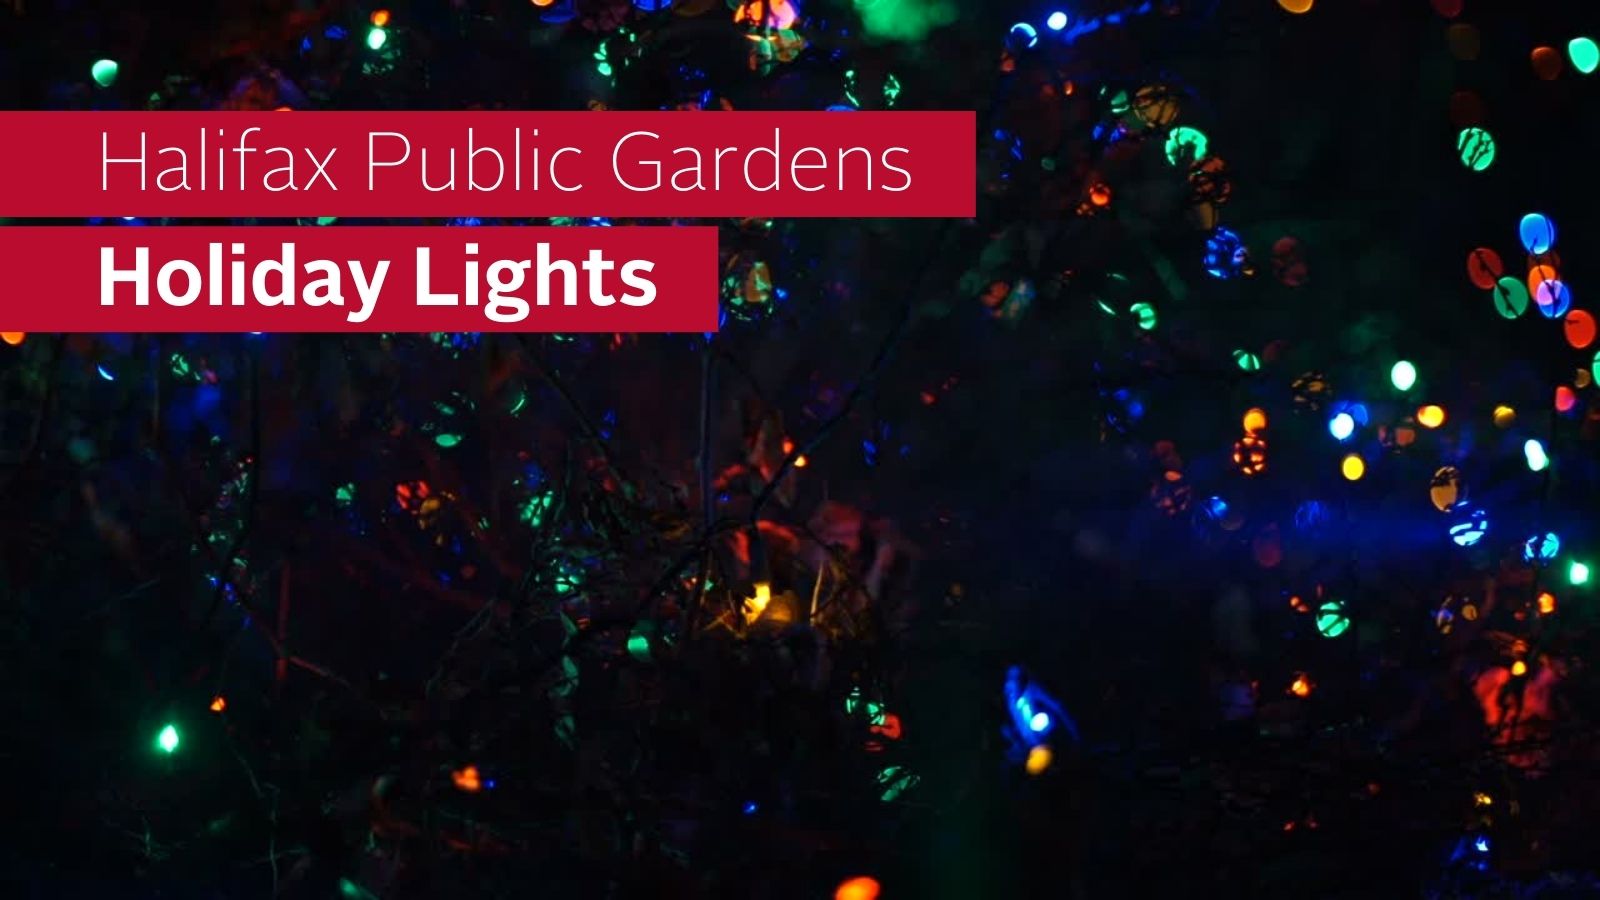 coloured holiday lights blurred behind text that reads Halifax Public Gardens Holiday Lights